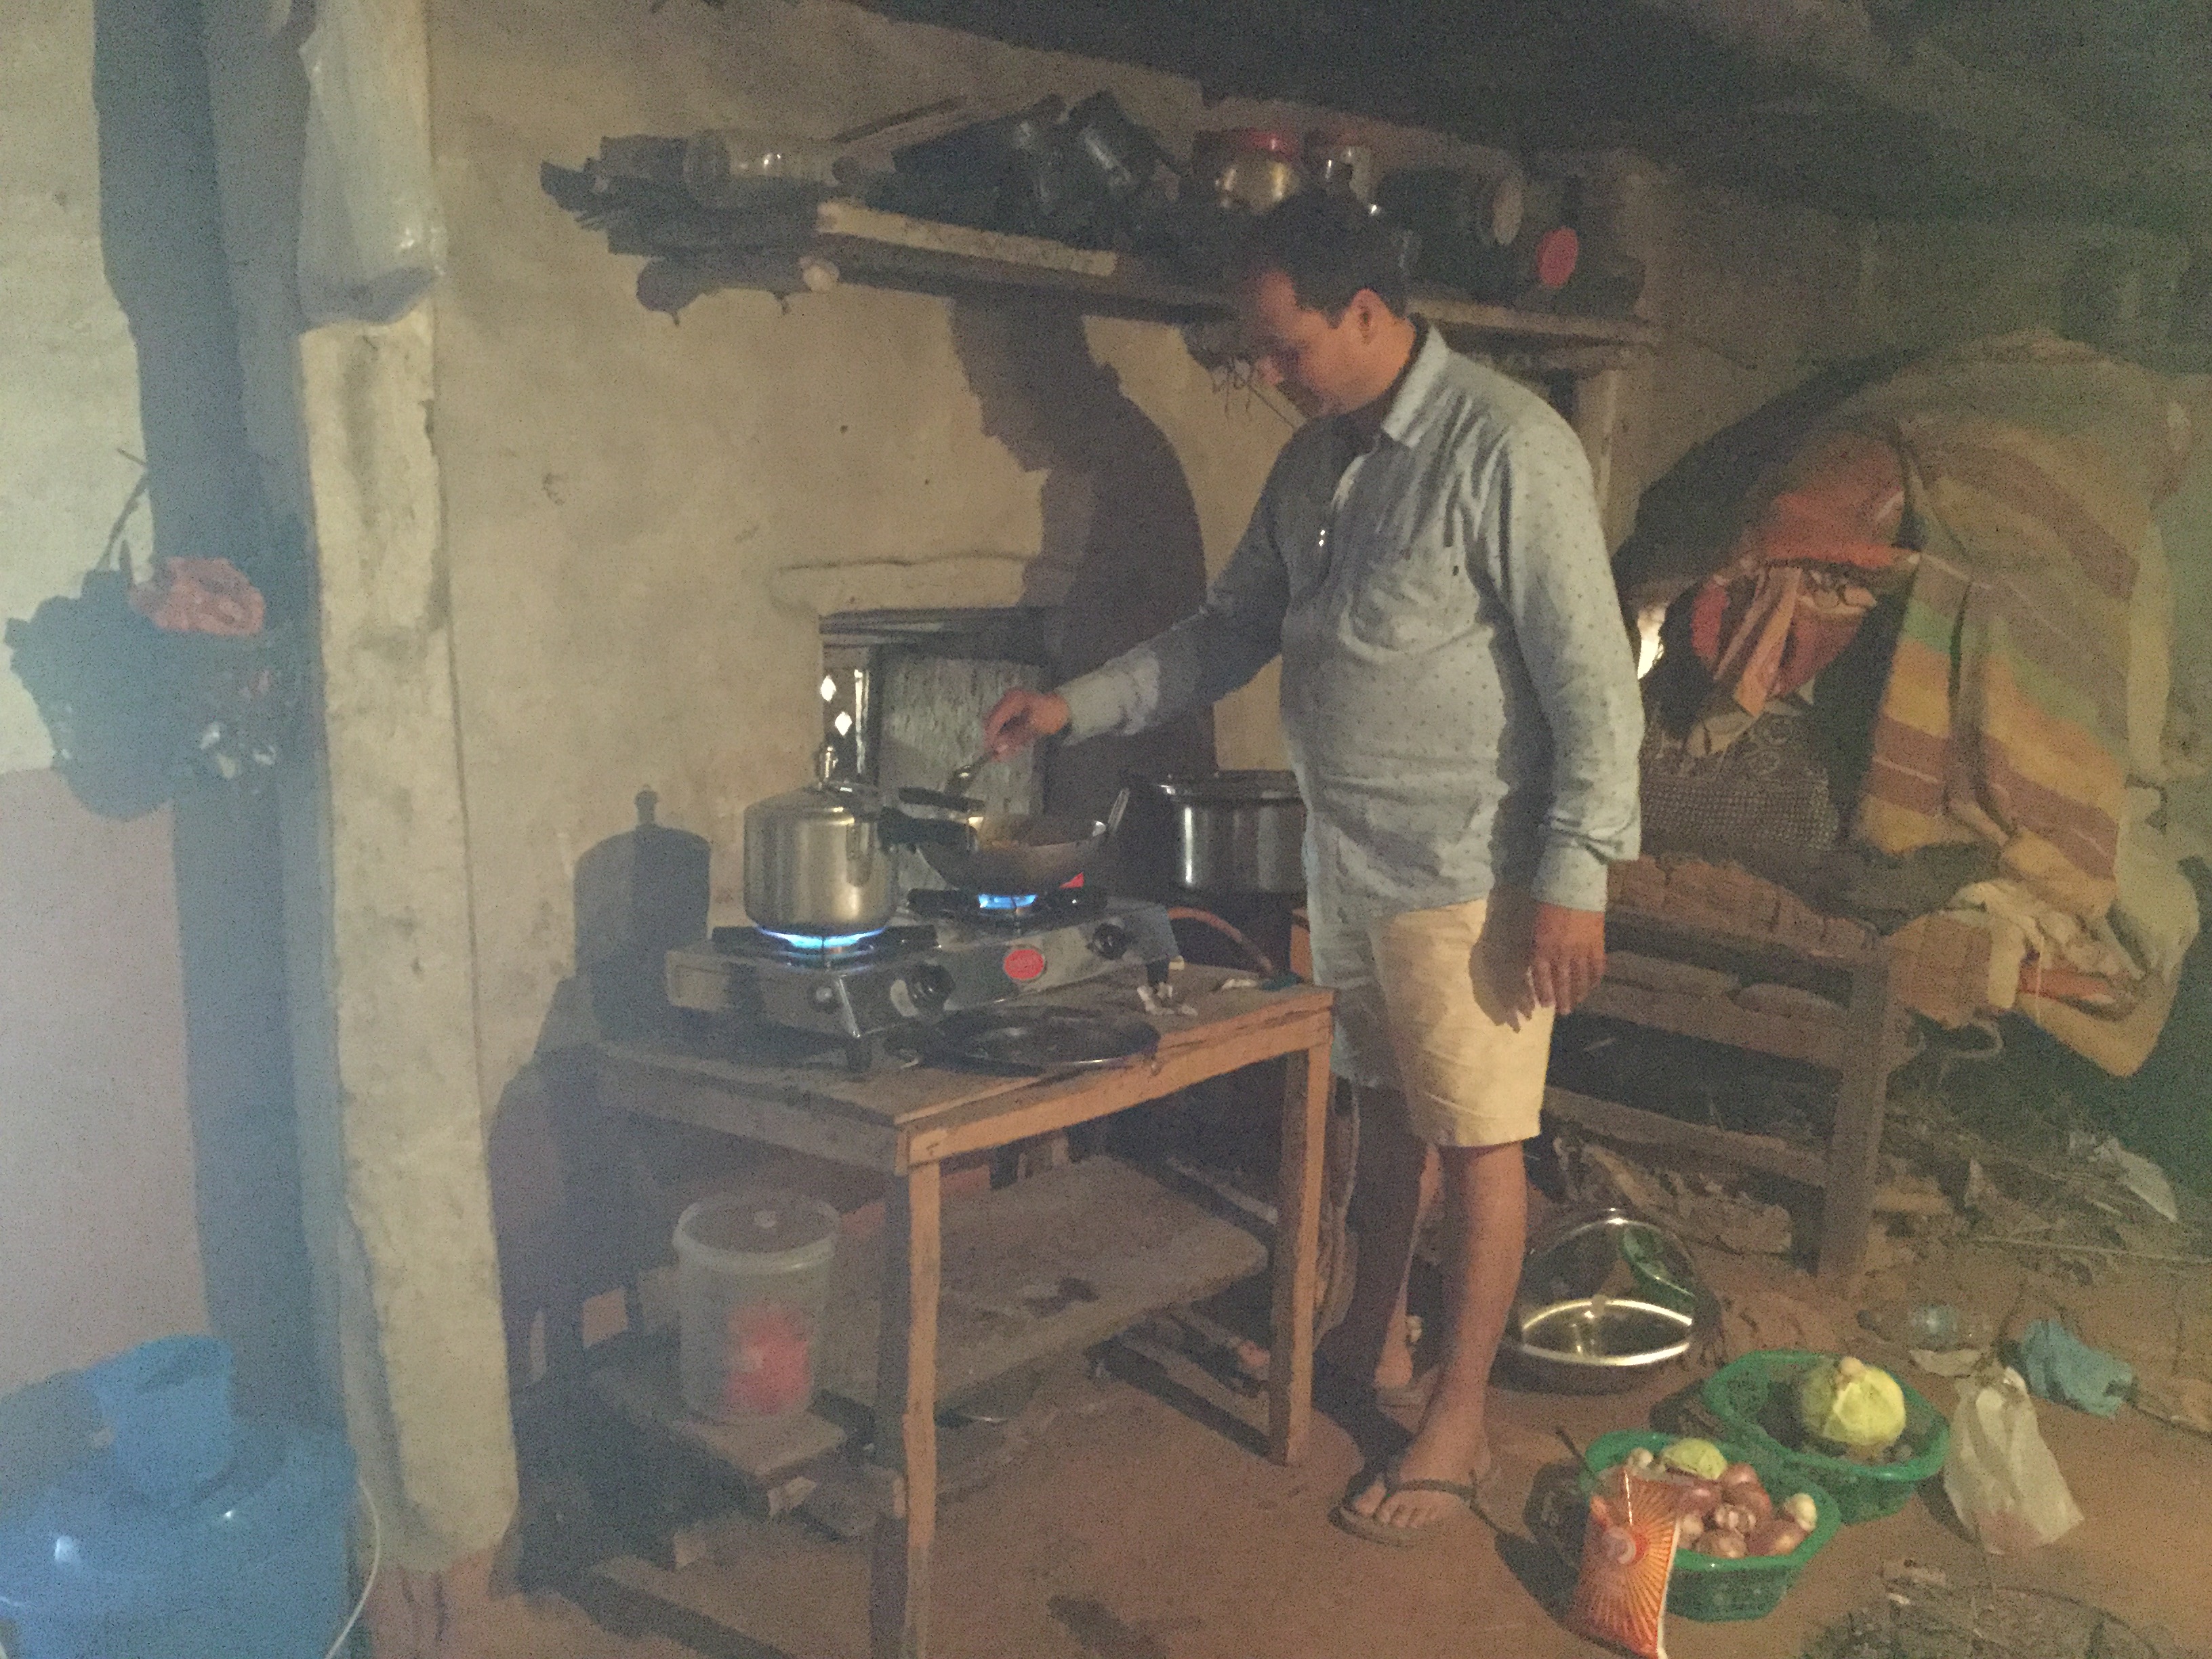 Being with the community soaking up the local way of livelihood and culture, it was one of the most rewarding part of intervention research. An excellent kitchen have had been established with the help of locals in the village.